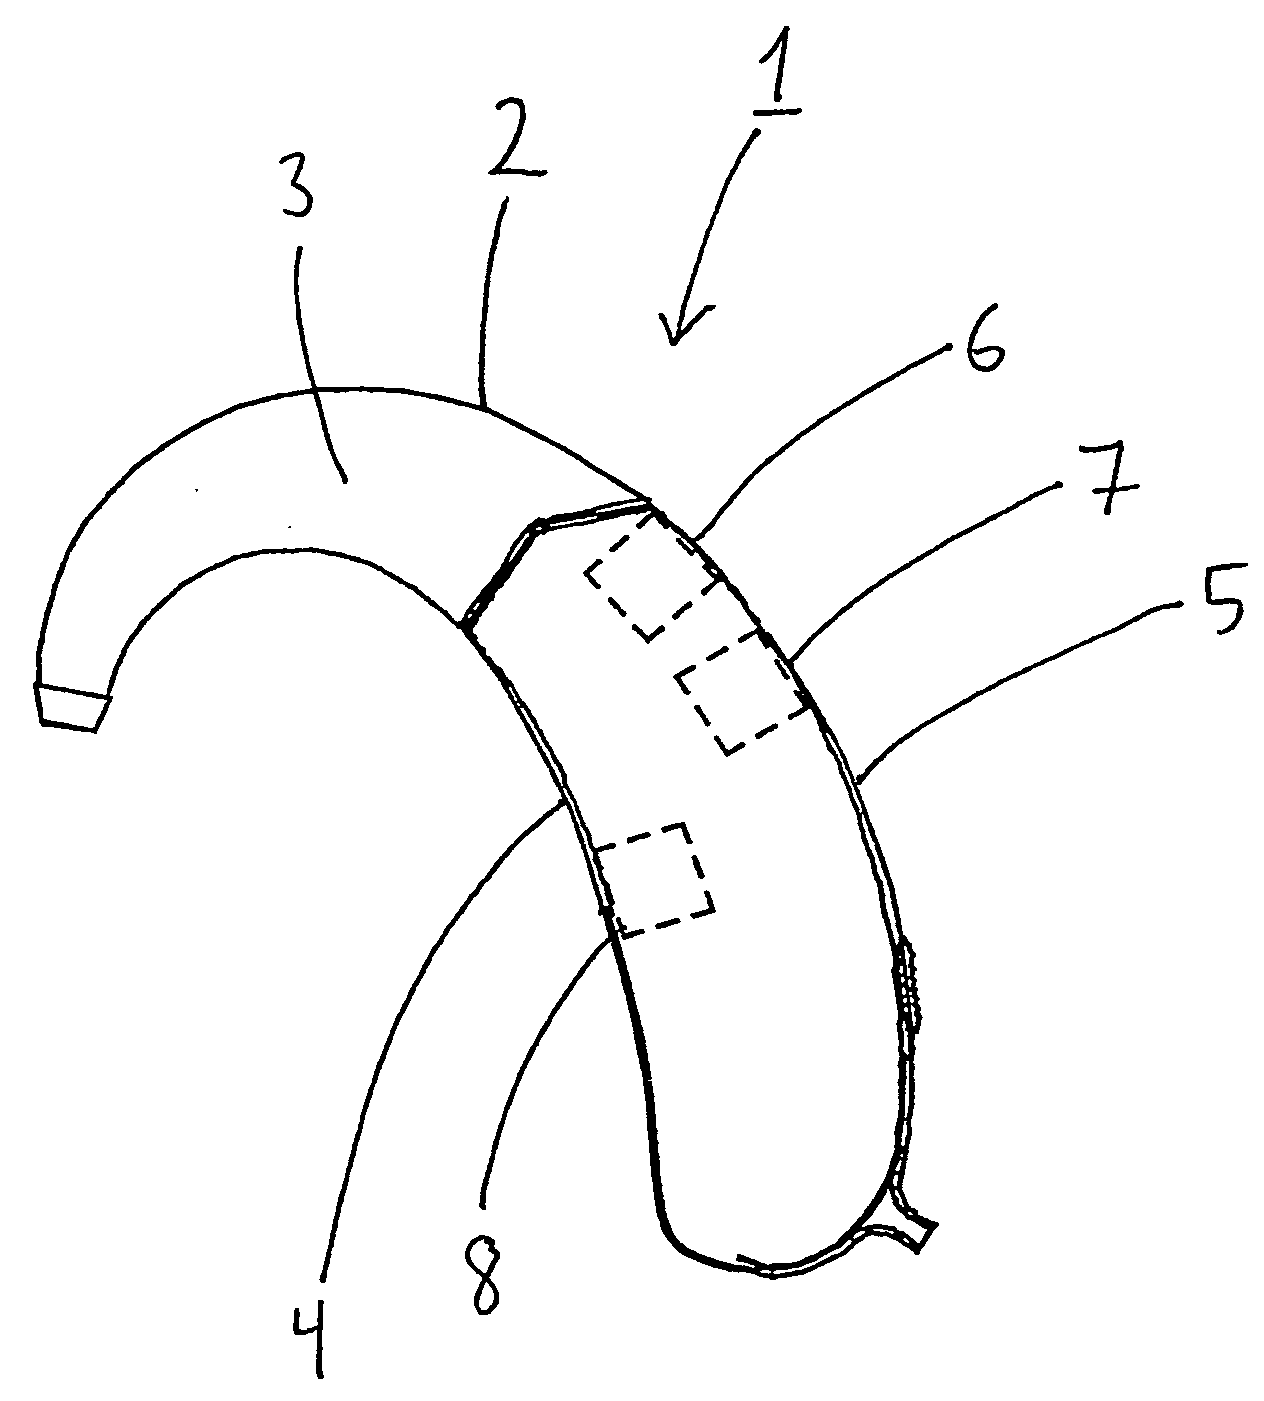 Hearing aid and a method of processing a sound signal in a hearing aid